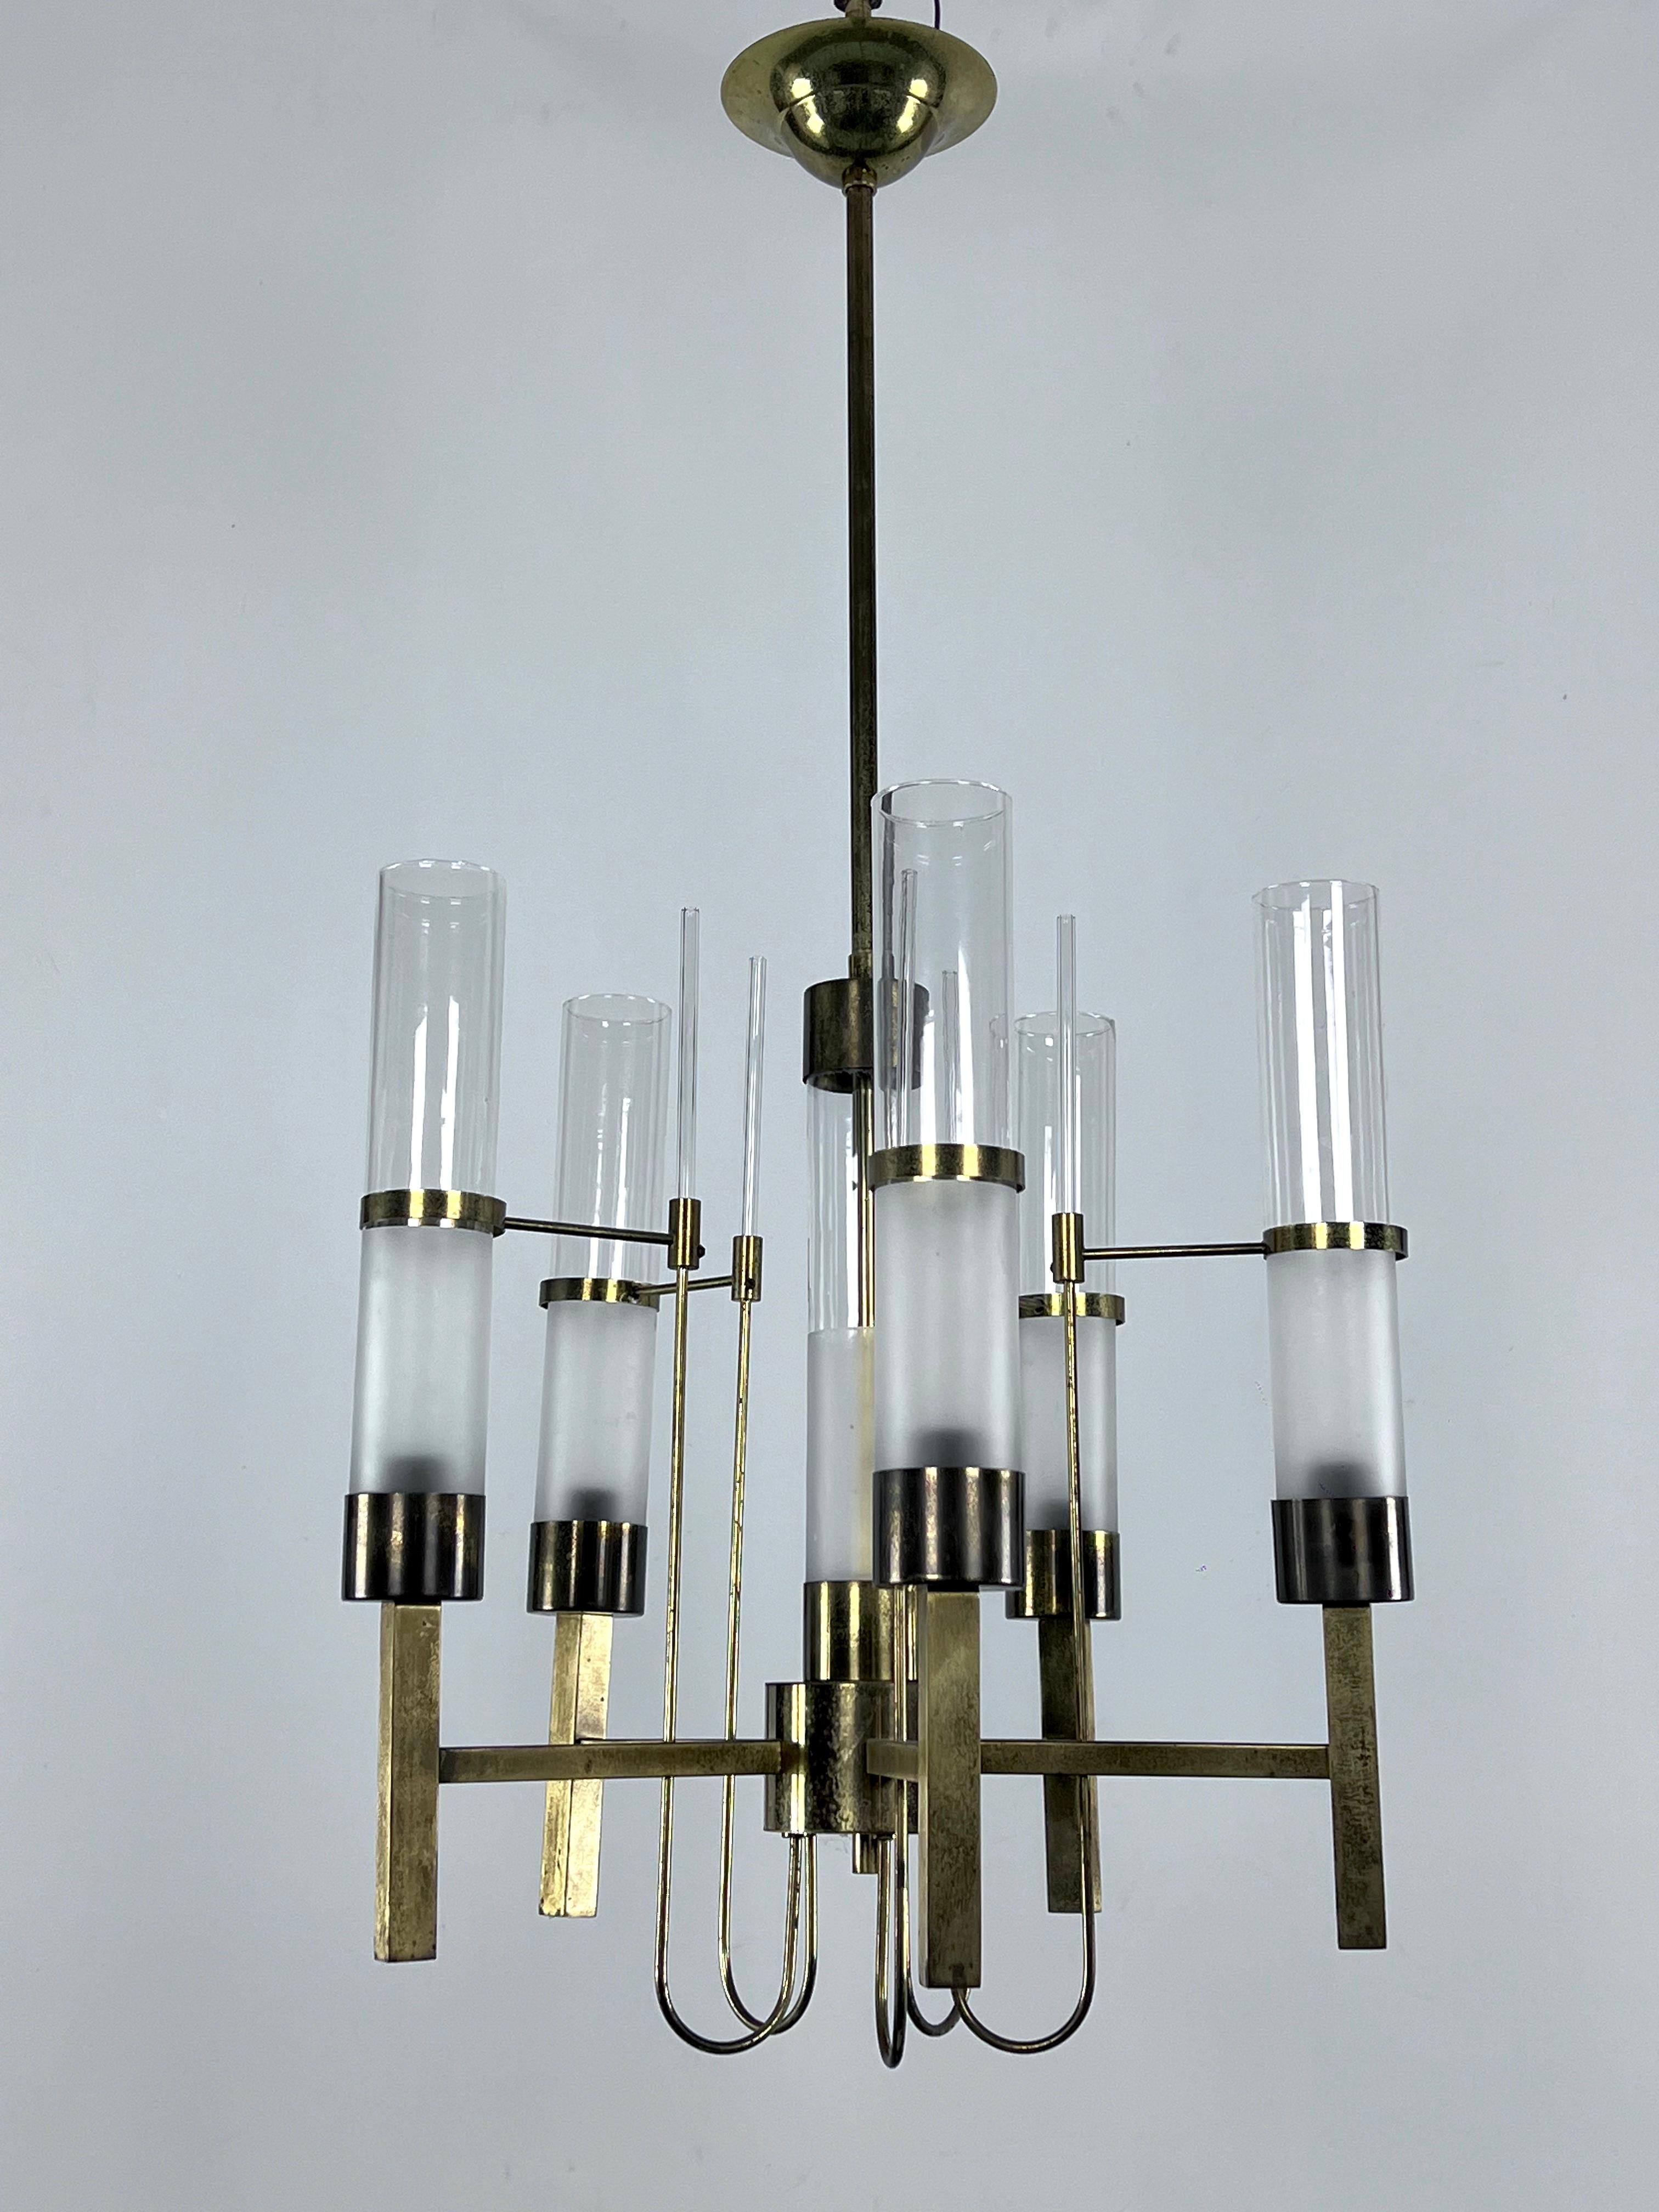 Five arms brass and glass chandelier produced in Italy by Sciolari. Very good original vintage condition with patina on the brass and normal trace of age and use. No cracks or chips. Height of fixture without rod 49 cm.